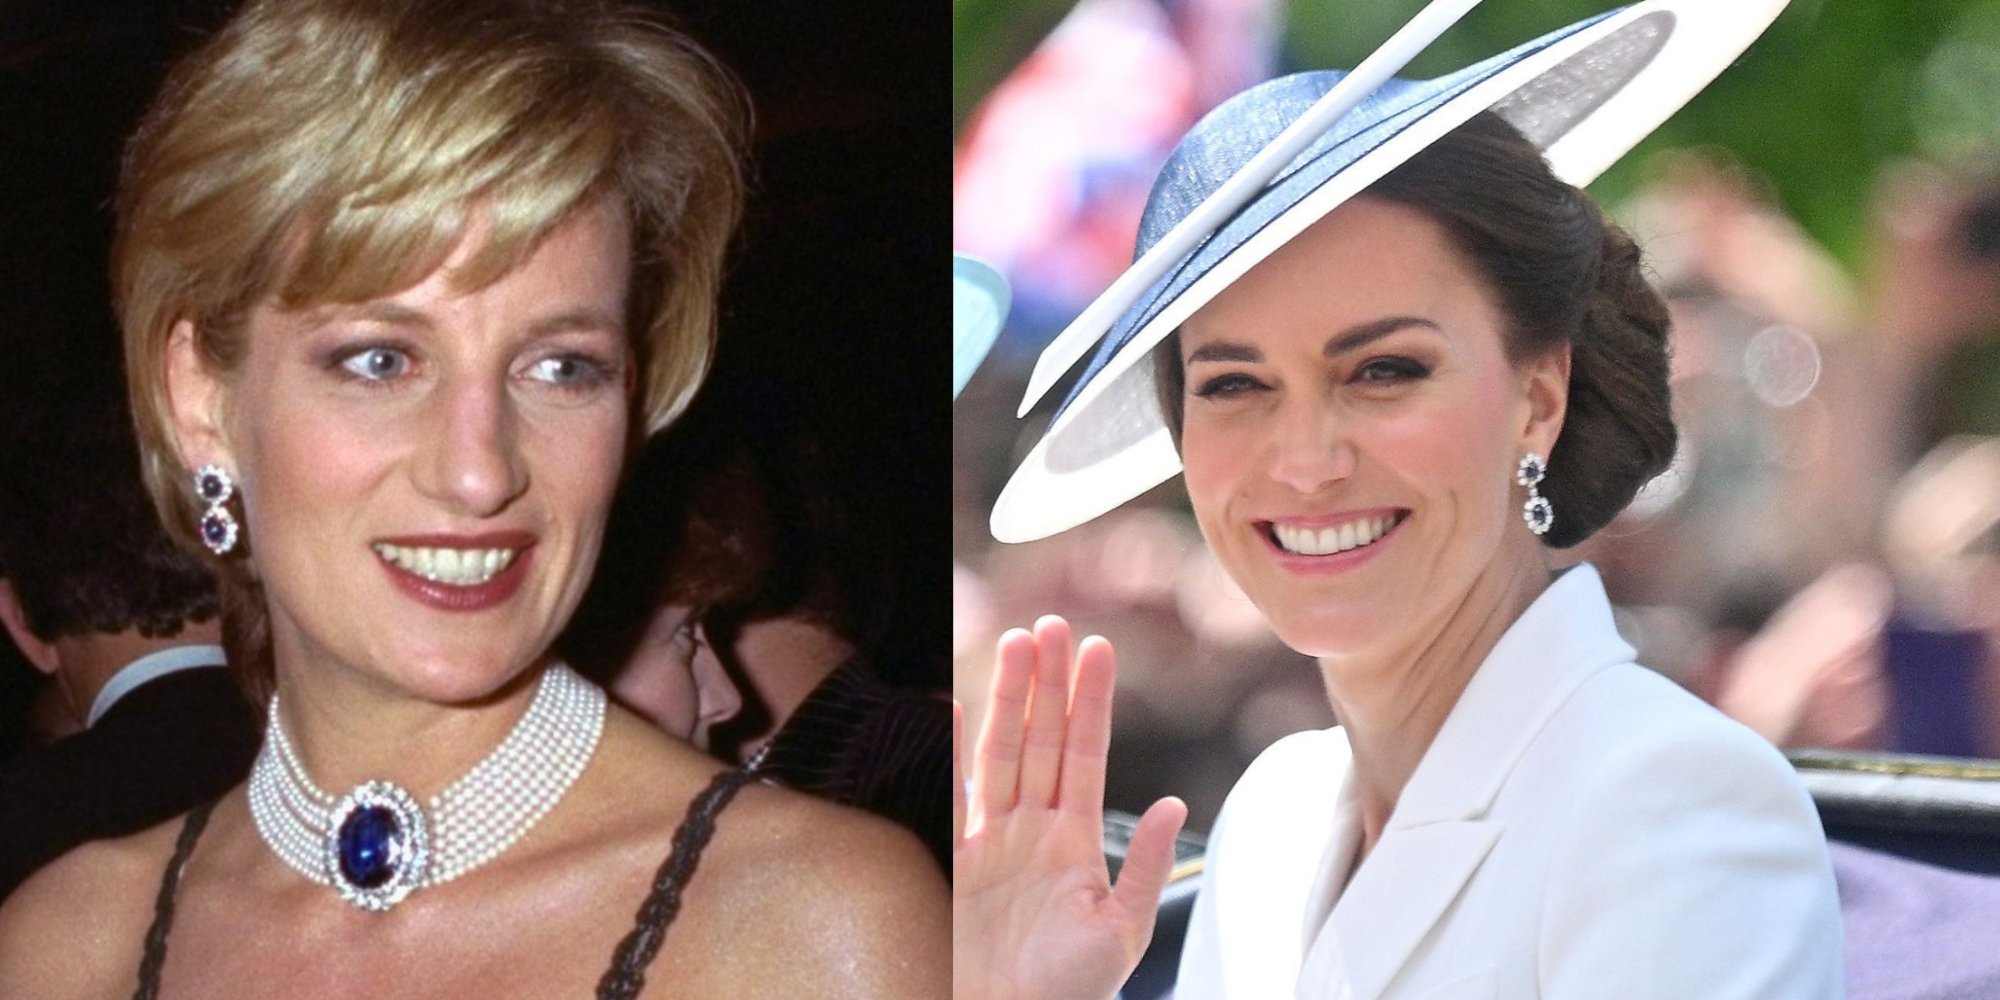 Princess Diana and Kate Middleton in side by side images wearing the same earrings.